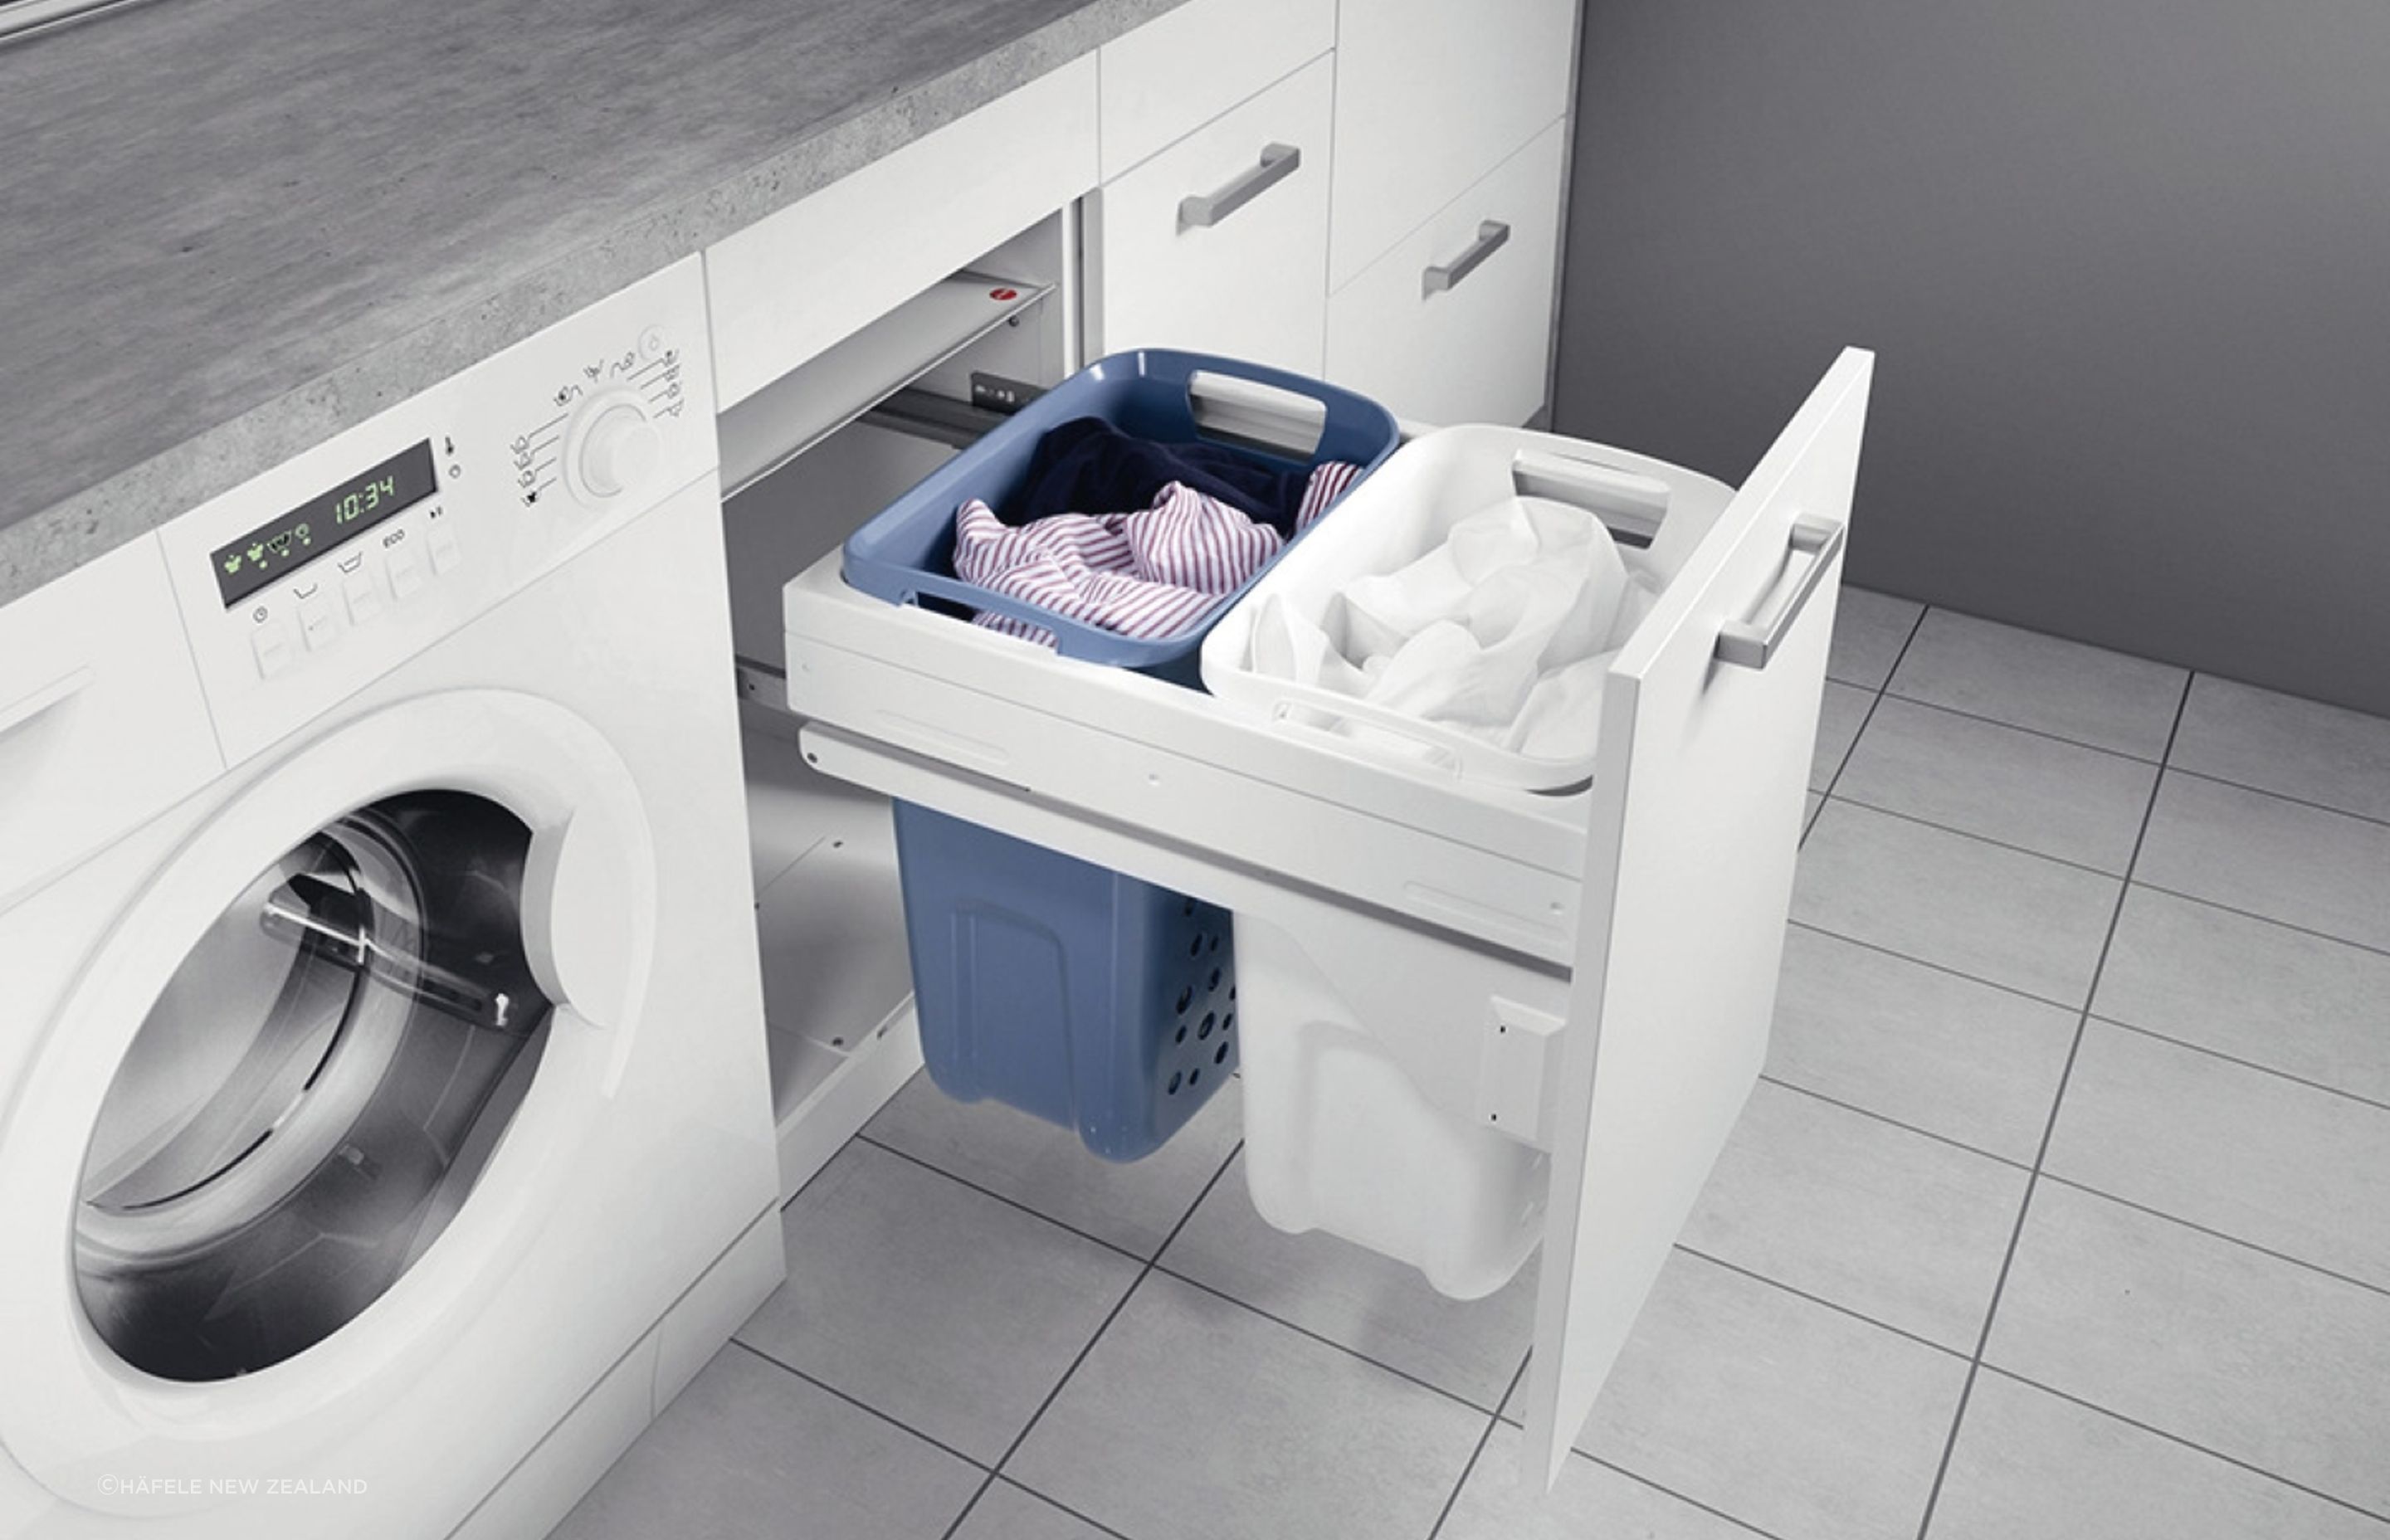 The Hailo Laundry Carrier is a great example of a pull-out laundry hamper with some great features including soft-close runners for smooth operation.